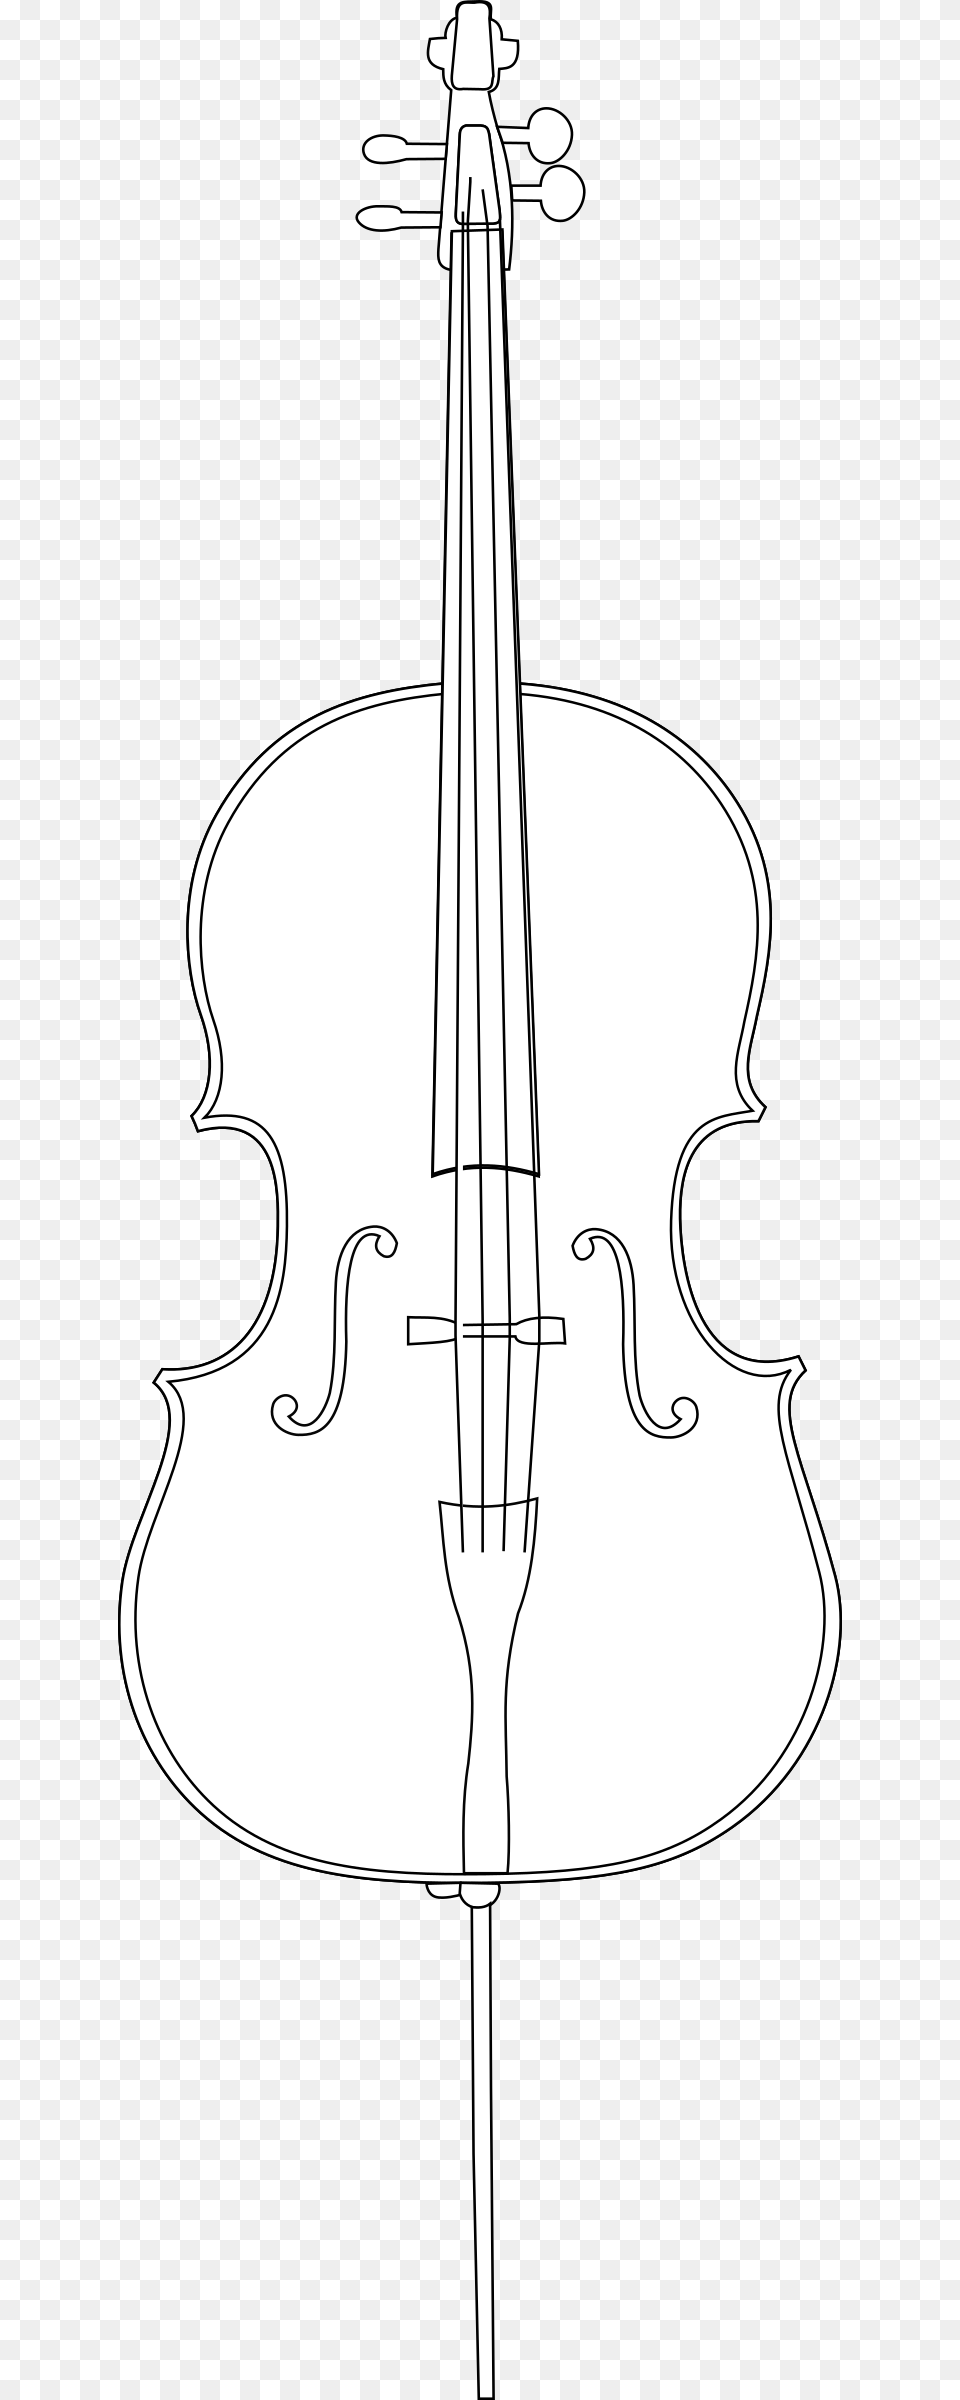 This Icons Design Of Cello, Musical Instrument Free Transparent Png